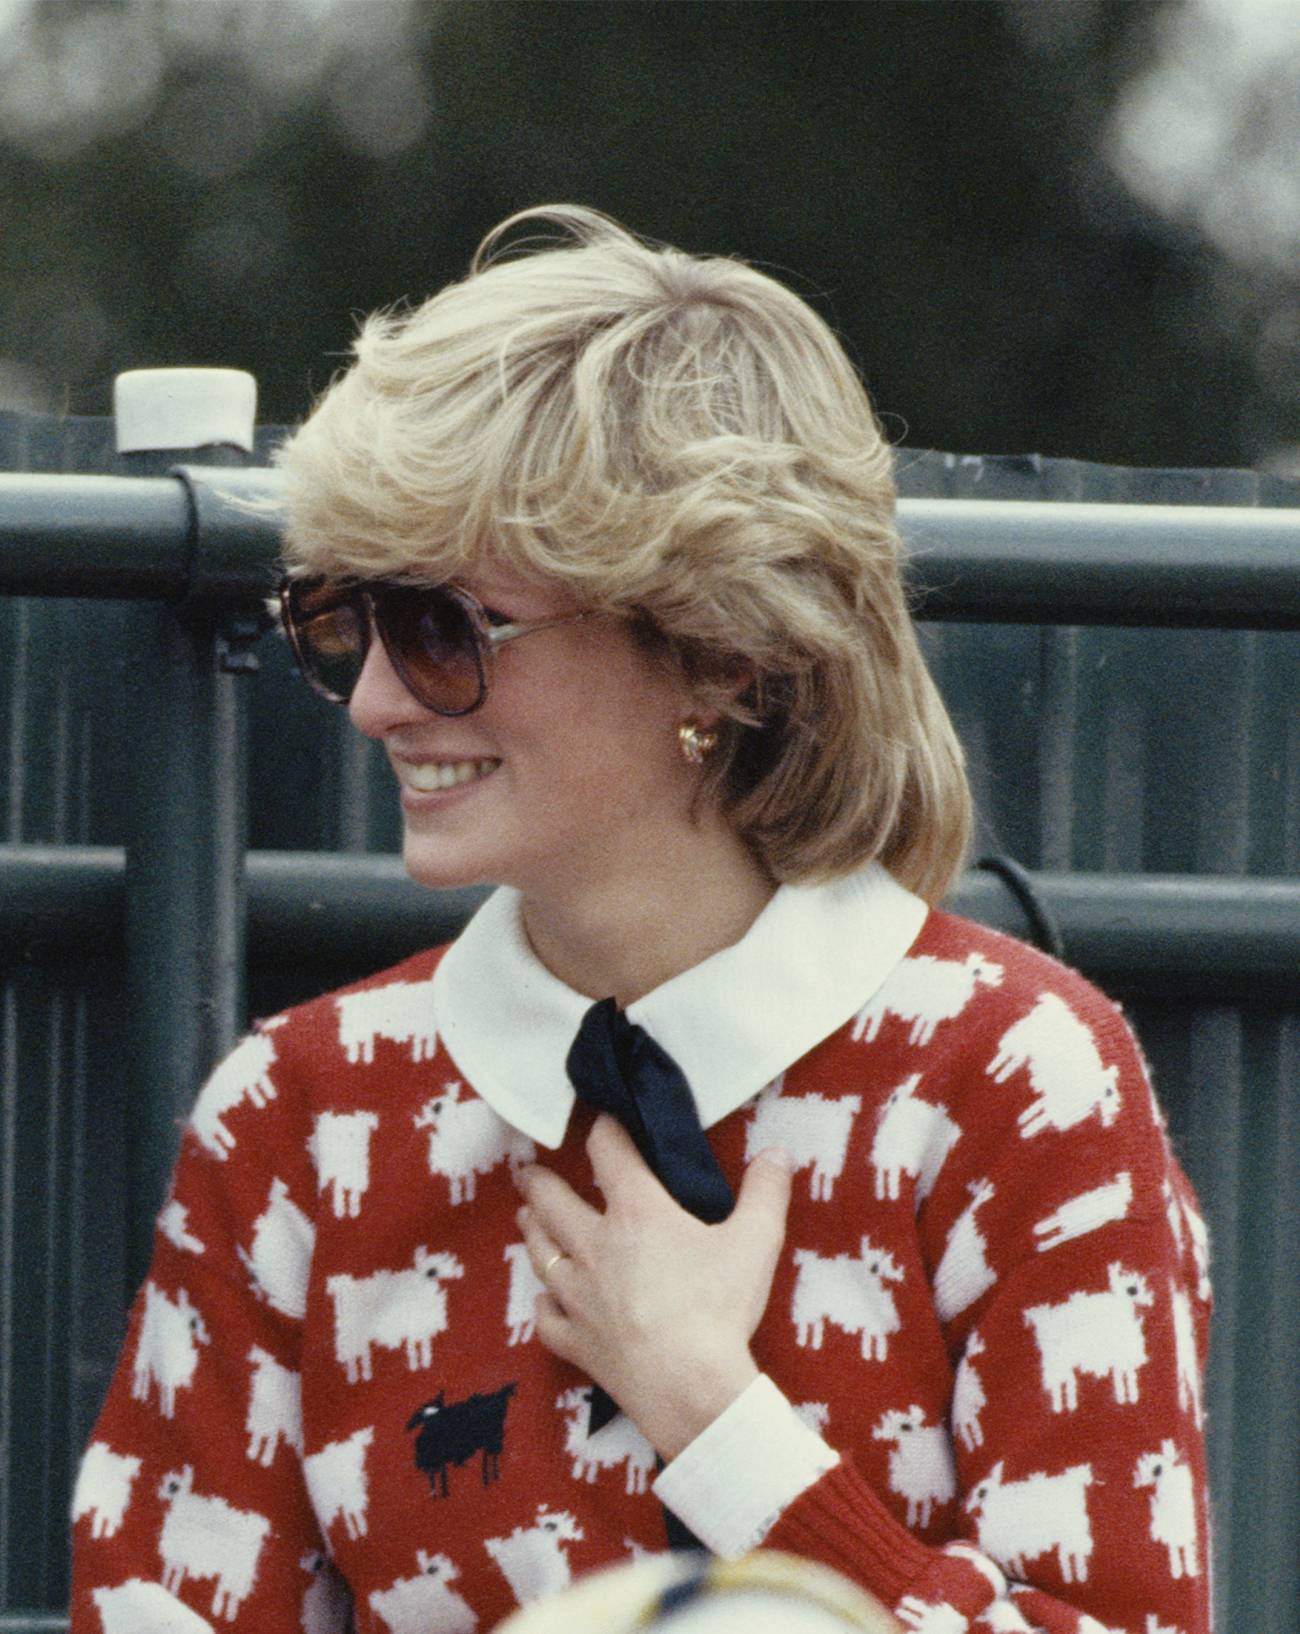 Why did Lady Diana’s jumper sell over a million dollars?